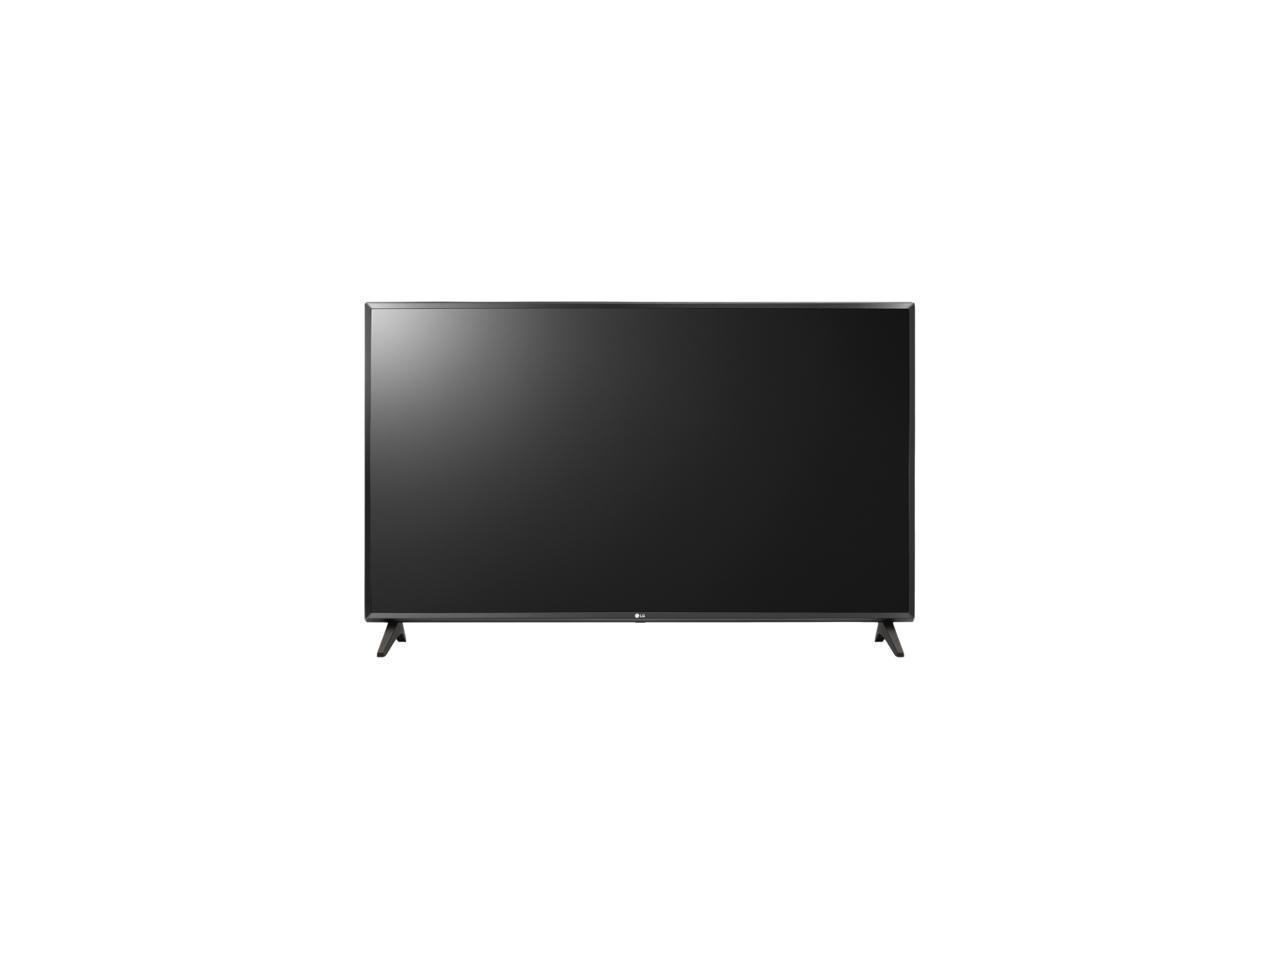 LG 49LT340C0UB 49" Full HD Commercial TV, HDMI, 1 RS232, USB, Speaker, Stand, Creston Connected, Full IP Control and WOL(Wake-on LAN)